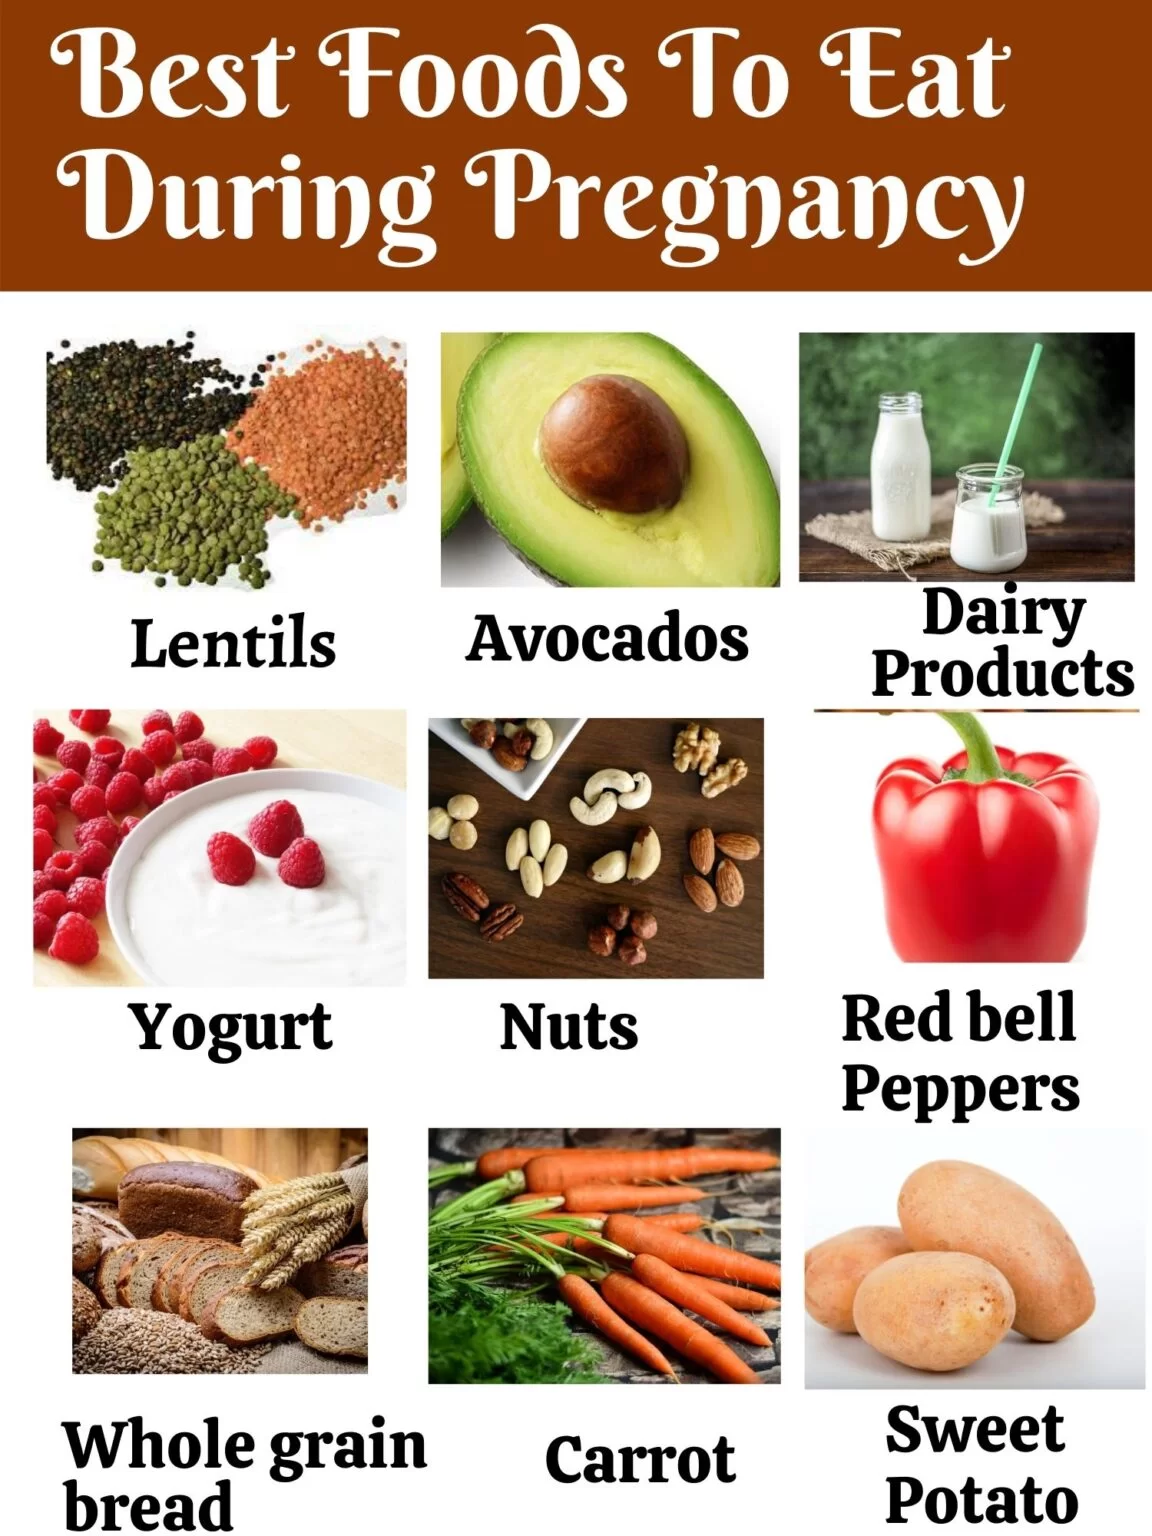 Best Food To Eat During Pregnancy For Baby Brain Development